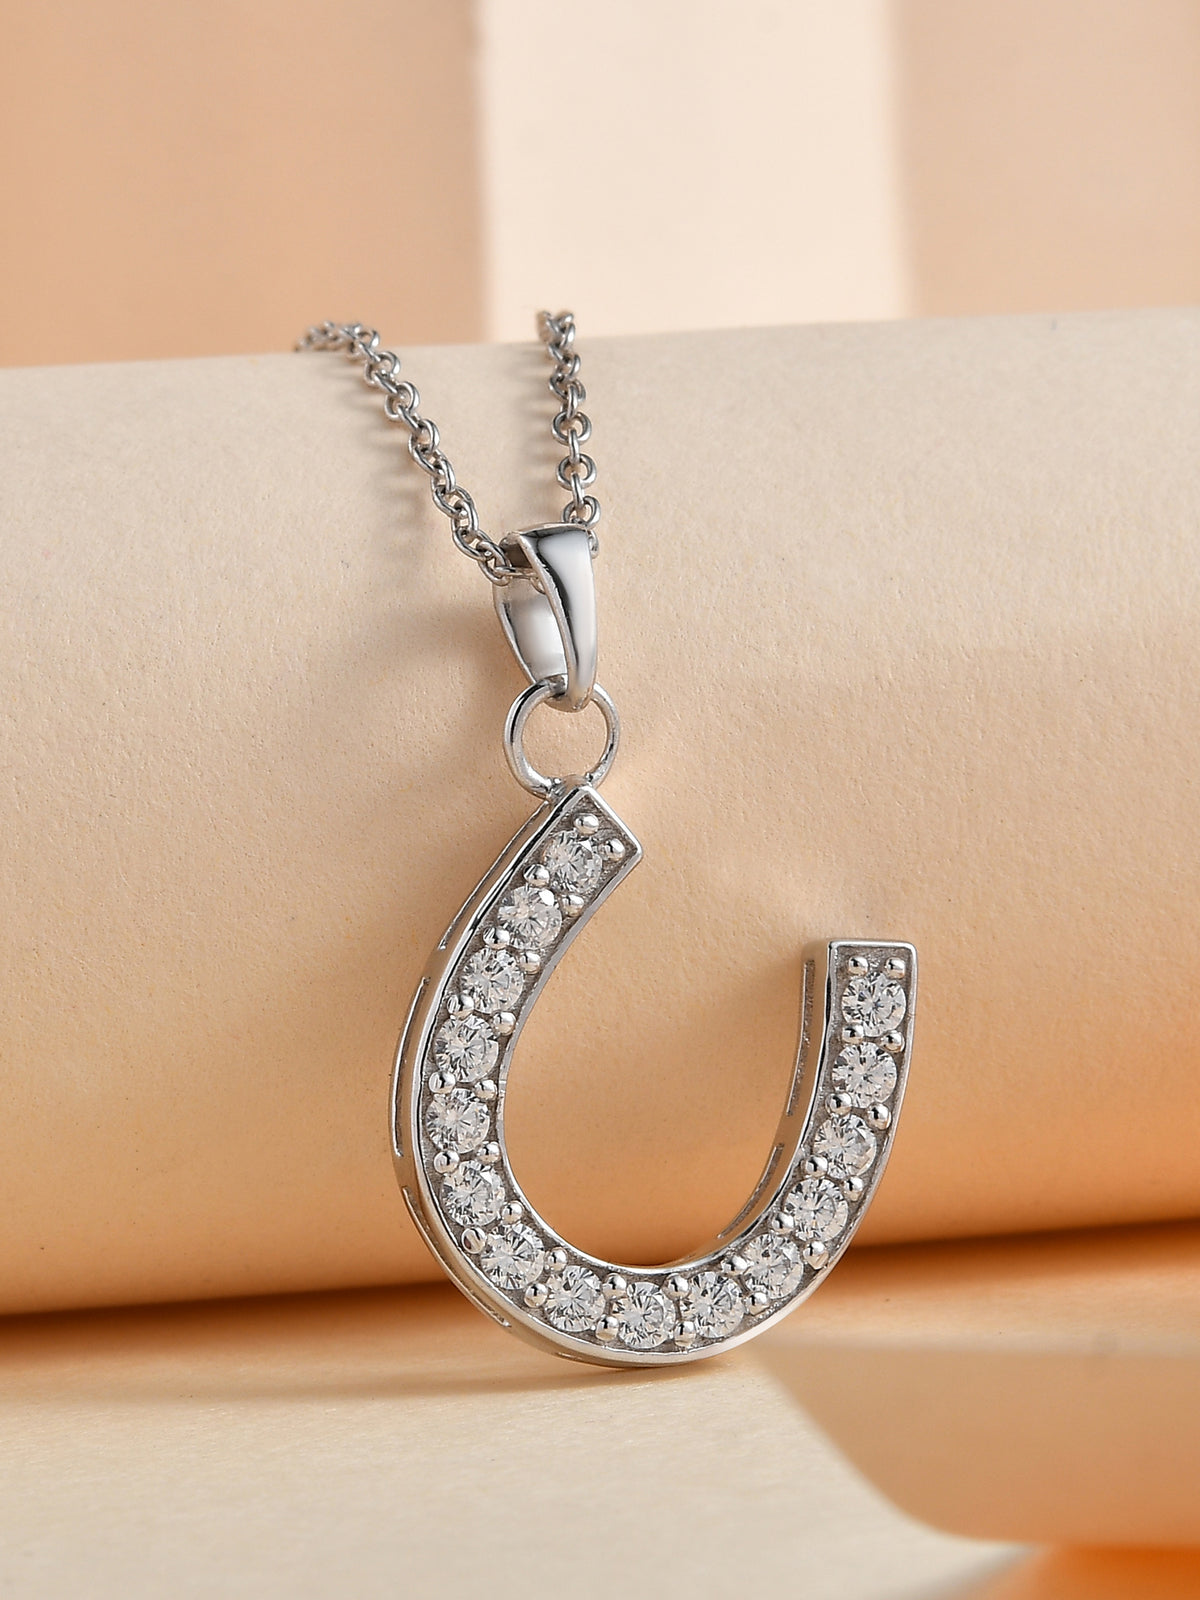 LUCKY SILVER HORSESHOE NECKLACE - The Special Gift Company